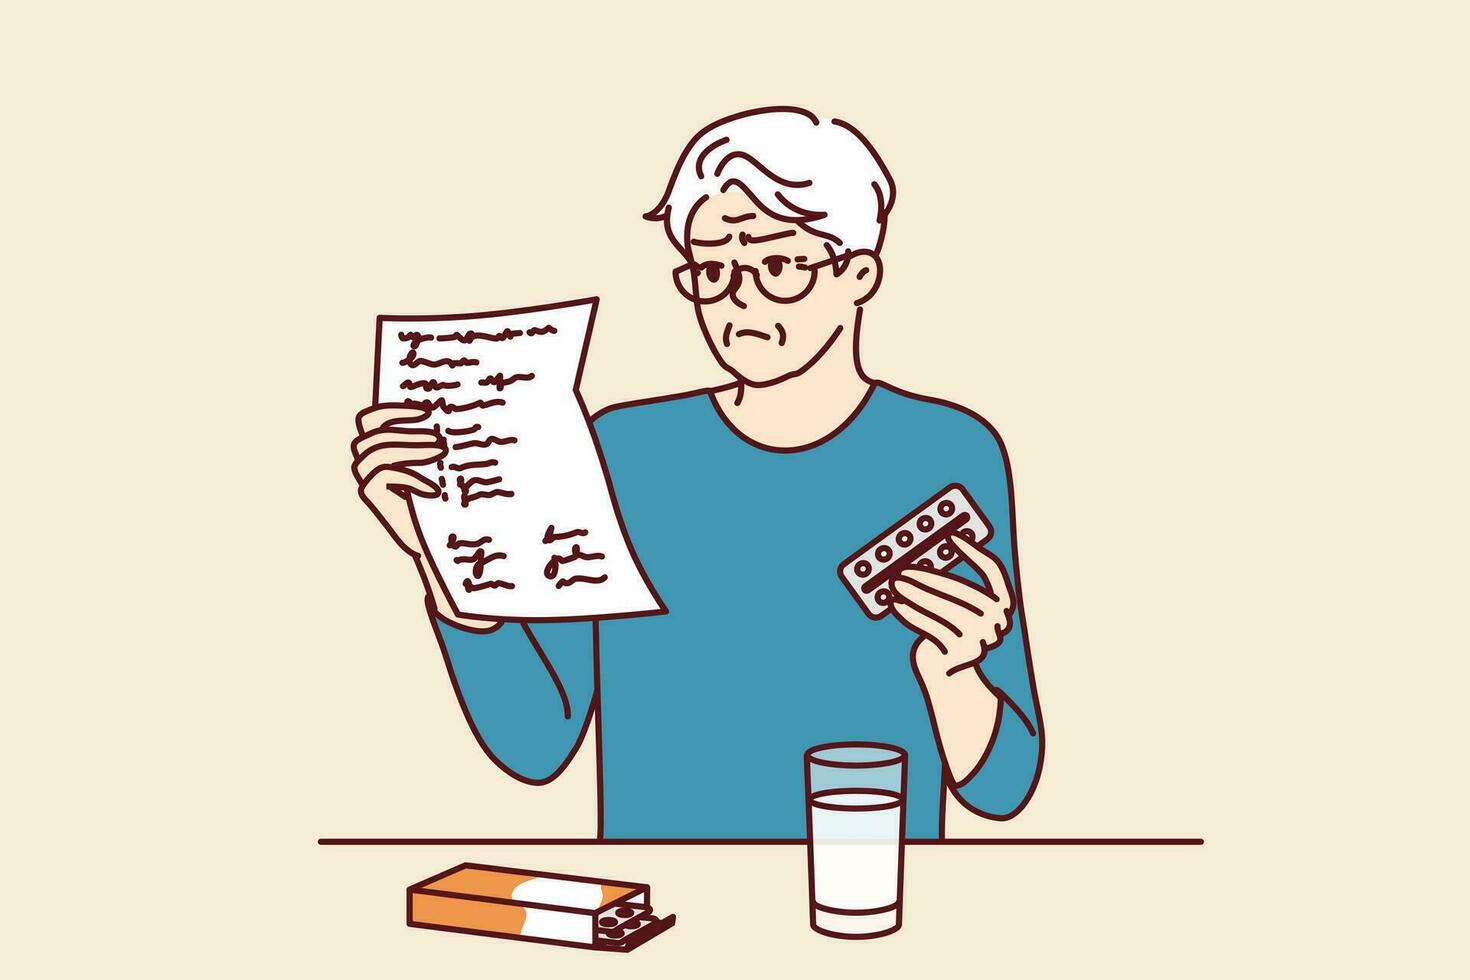 Elderly man takes medicine and reads dosage instructions for pills prescribed by doctor. Gray-haired elderly human is studying instructions to learn about contraindications and side effects of pills. vector